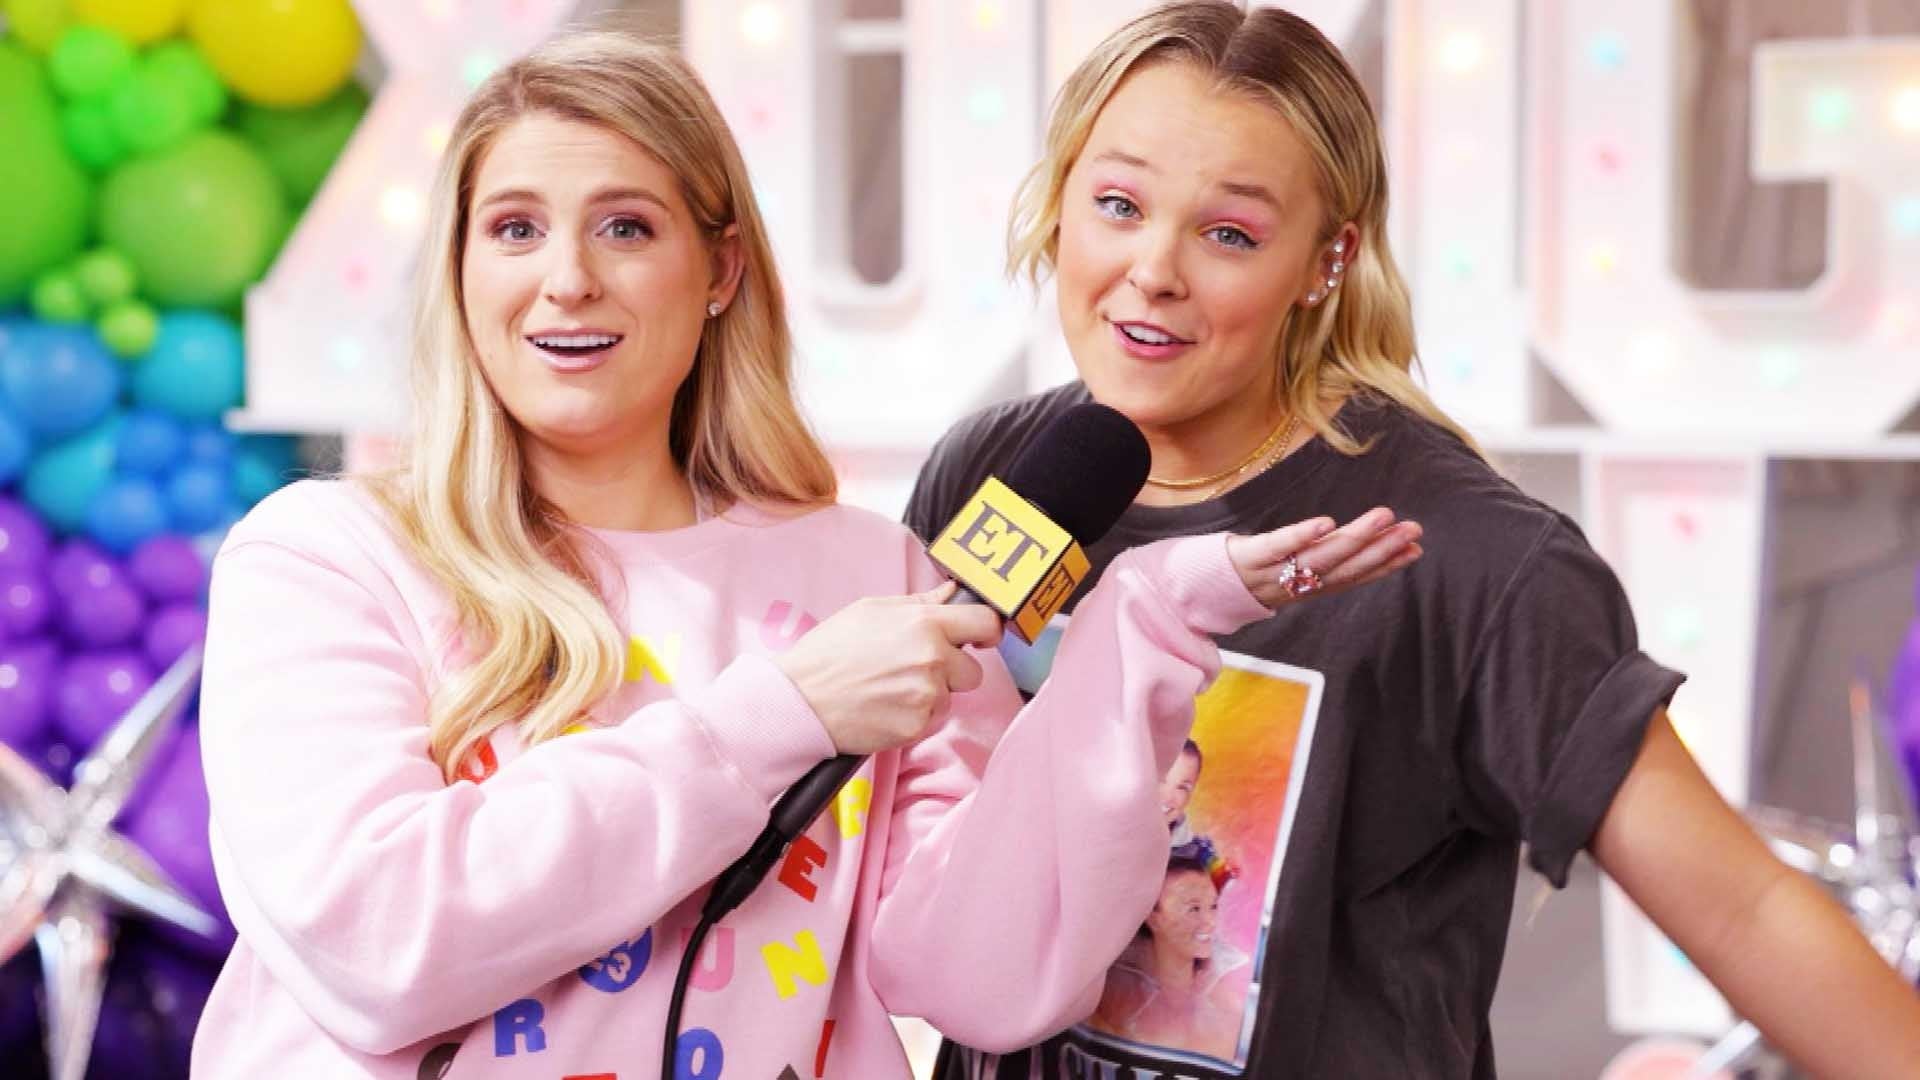 Meghan Trainor and JoJo Siwa Team Up to Dance Against Cancer (Exclusive)